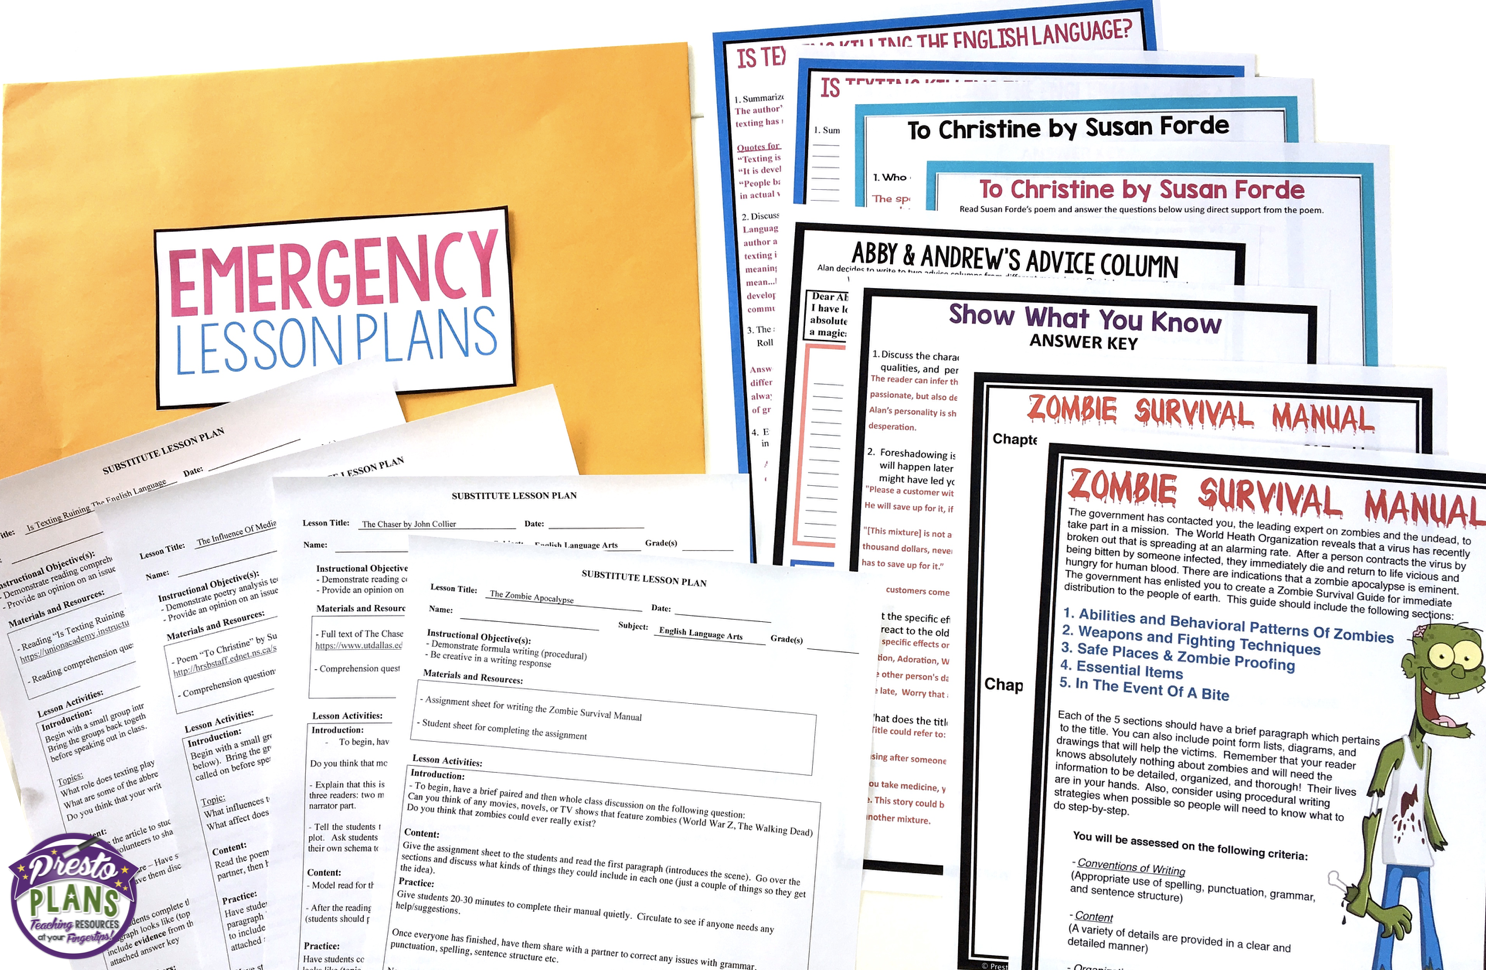 Emergency Lesson Plans for Teaching While Pregnant